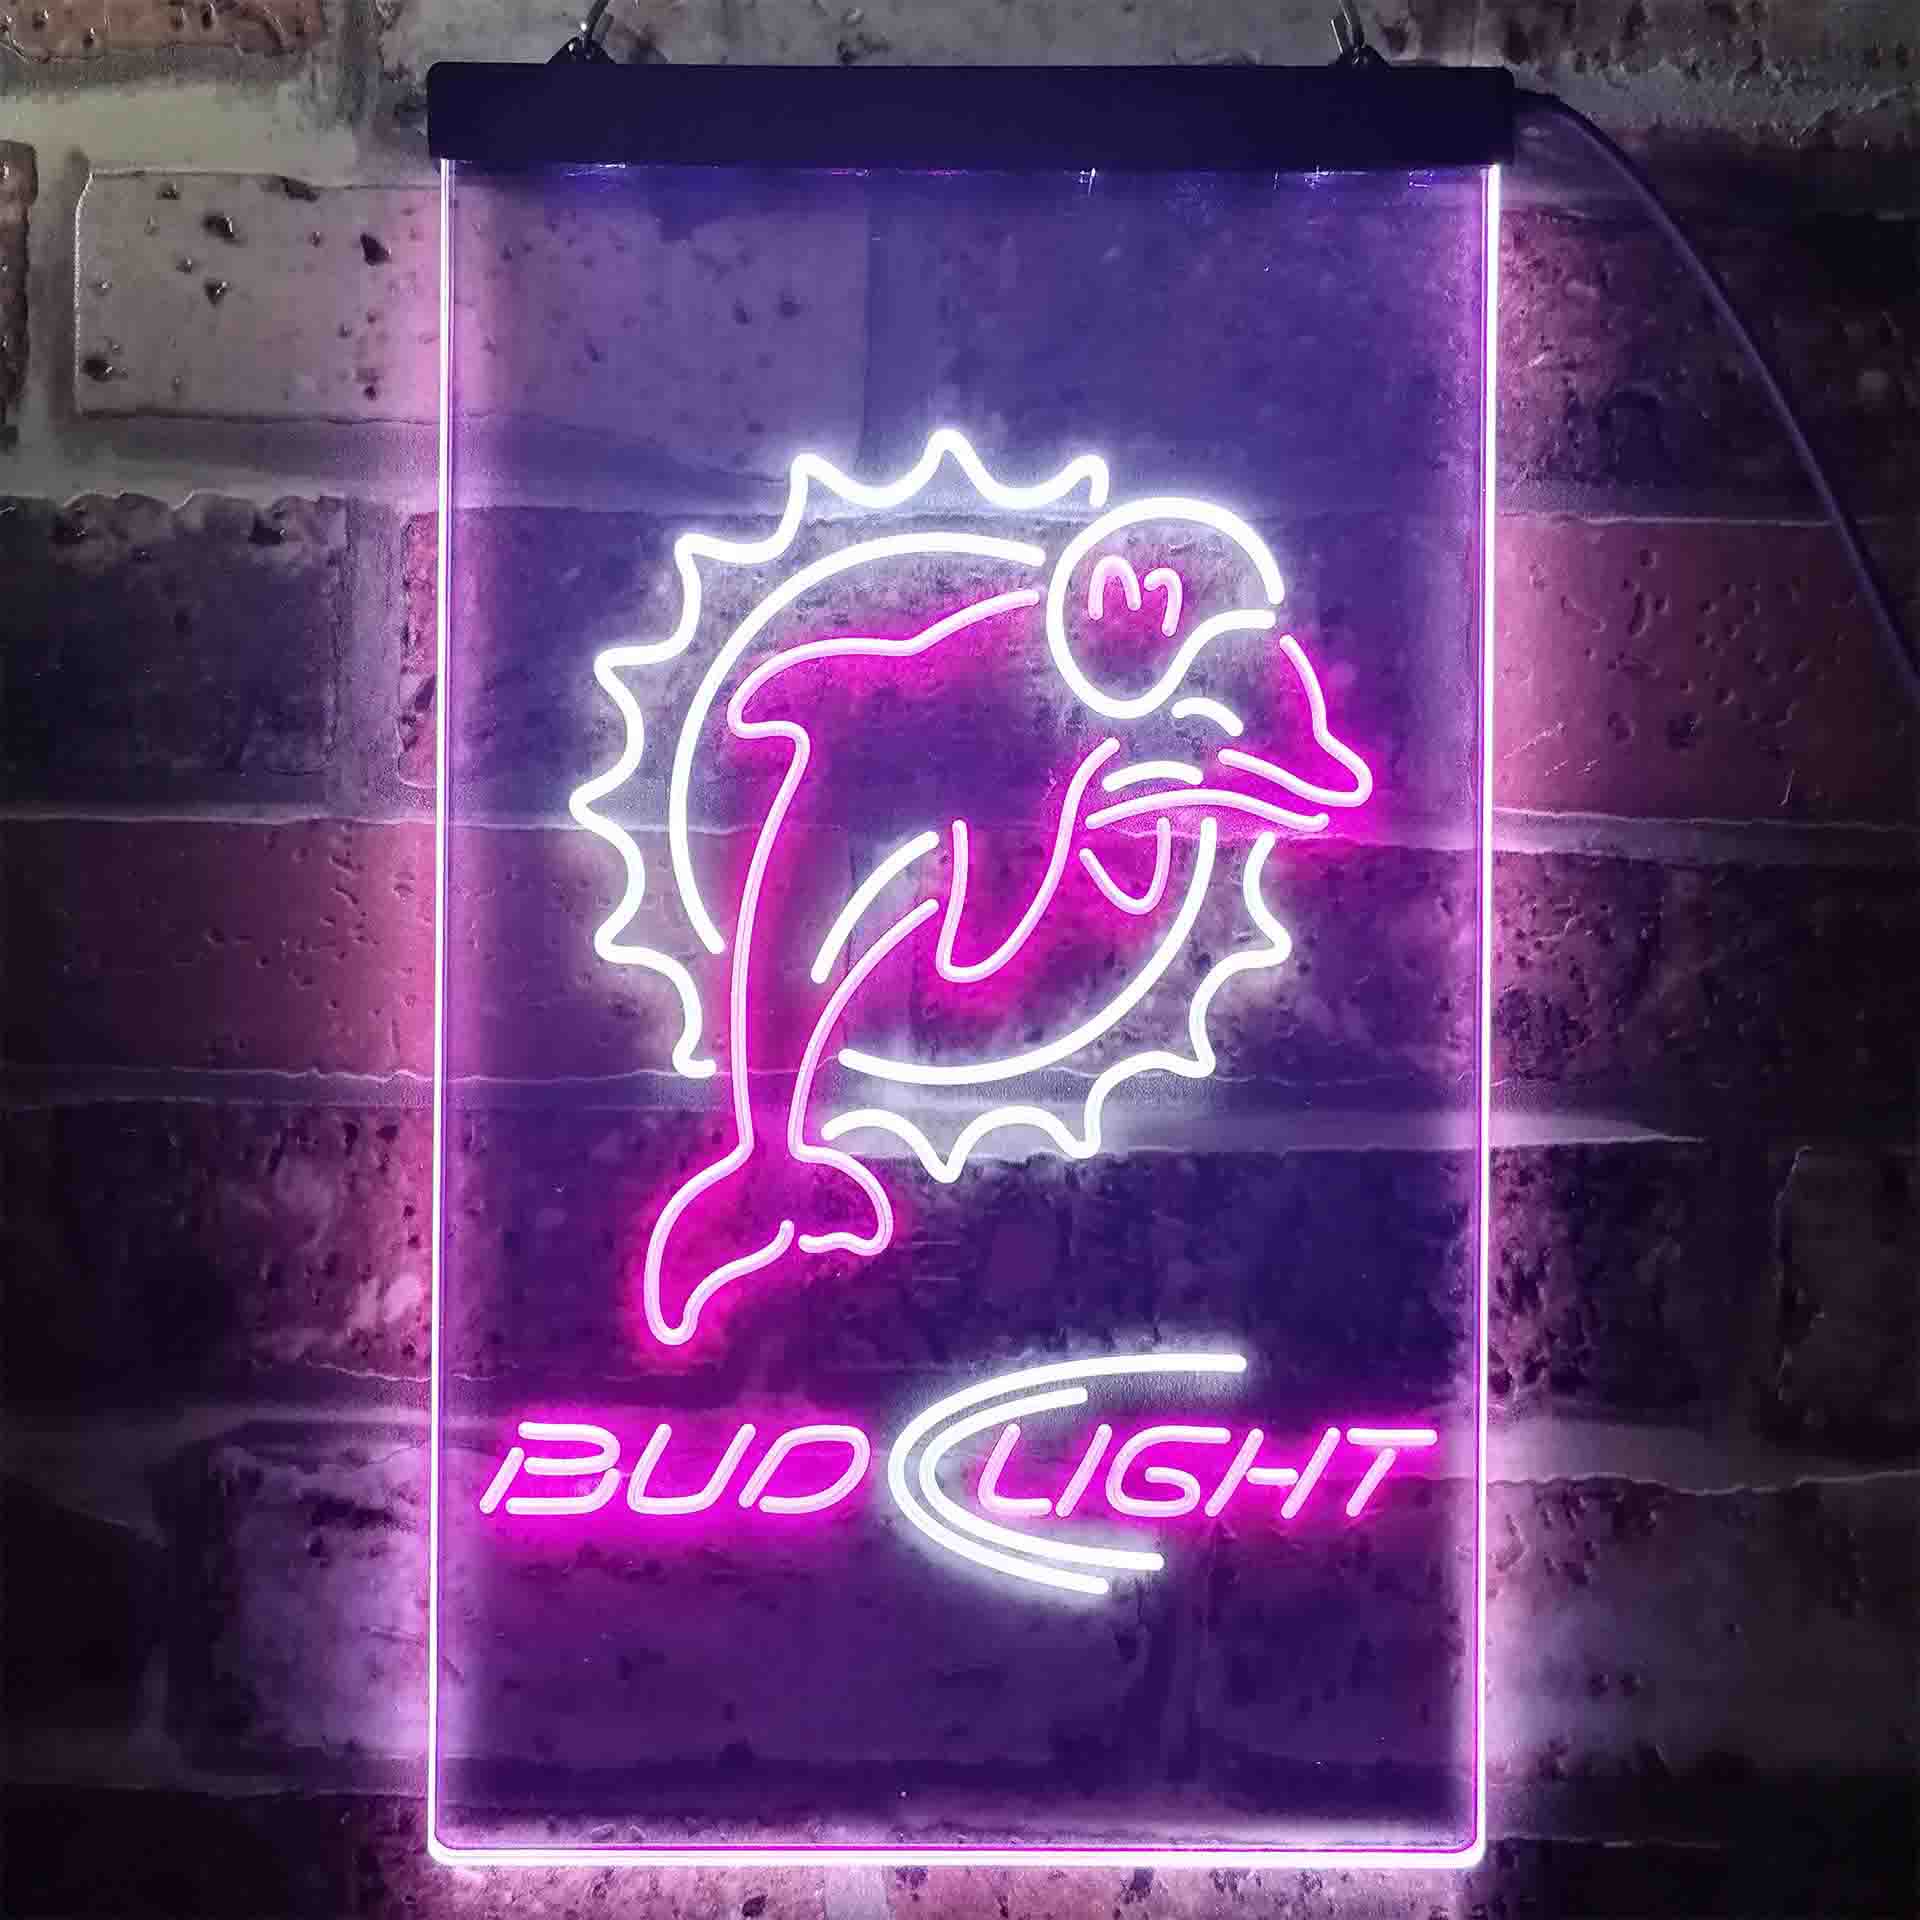 Miami Dolphins Bud Light LED Neon Sign